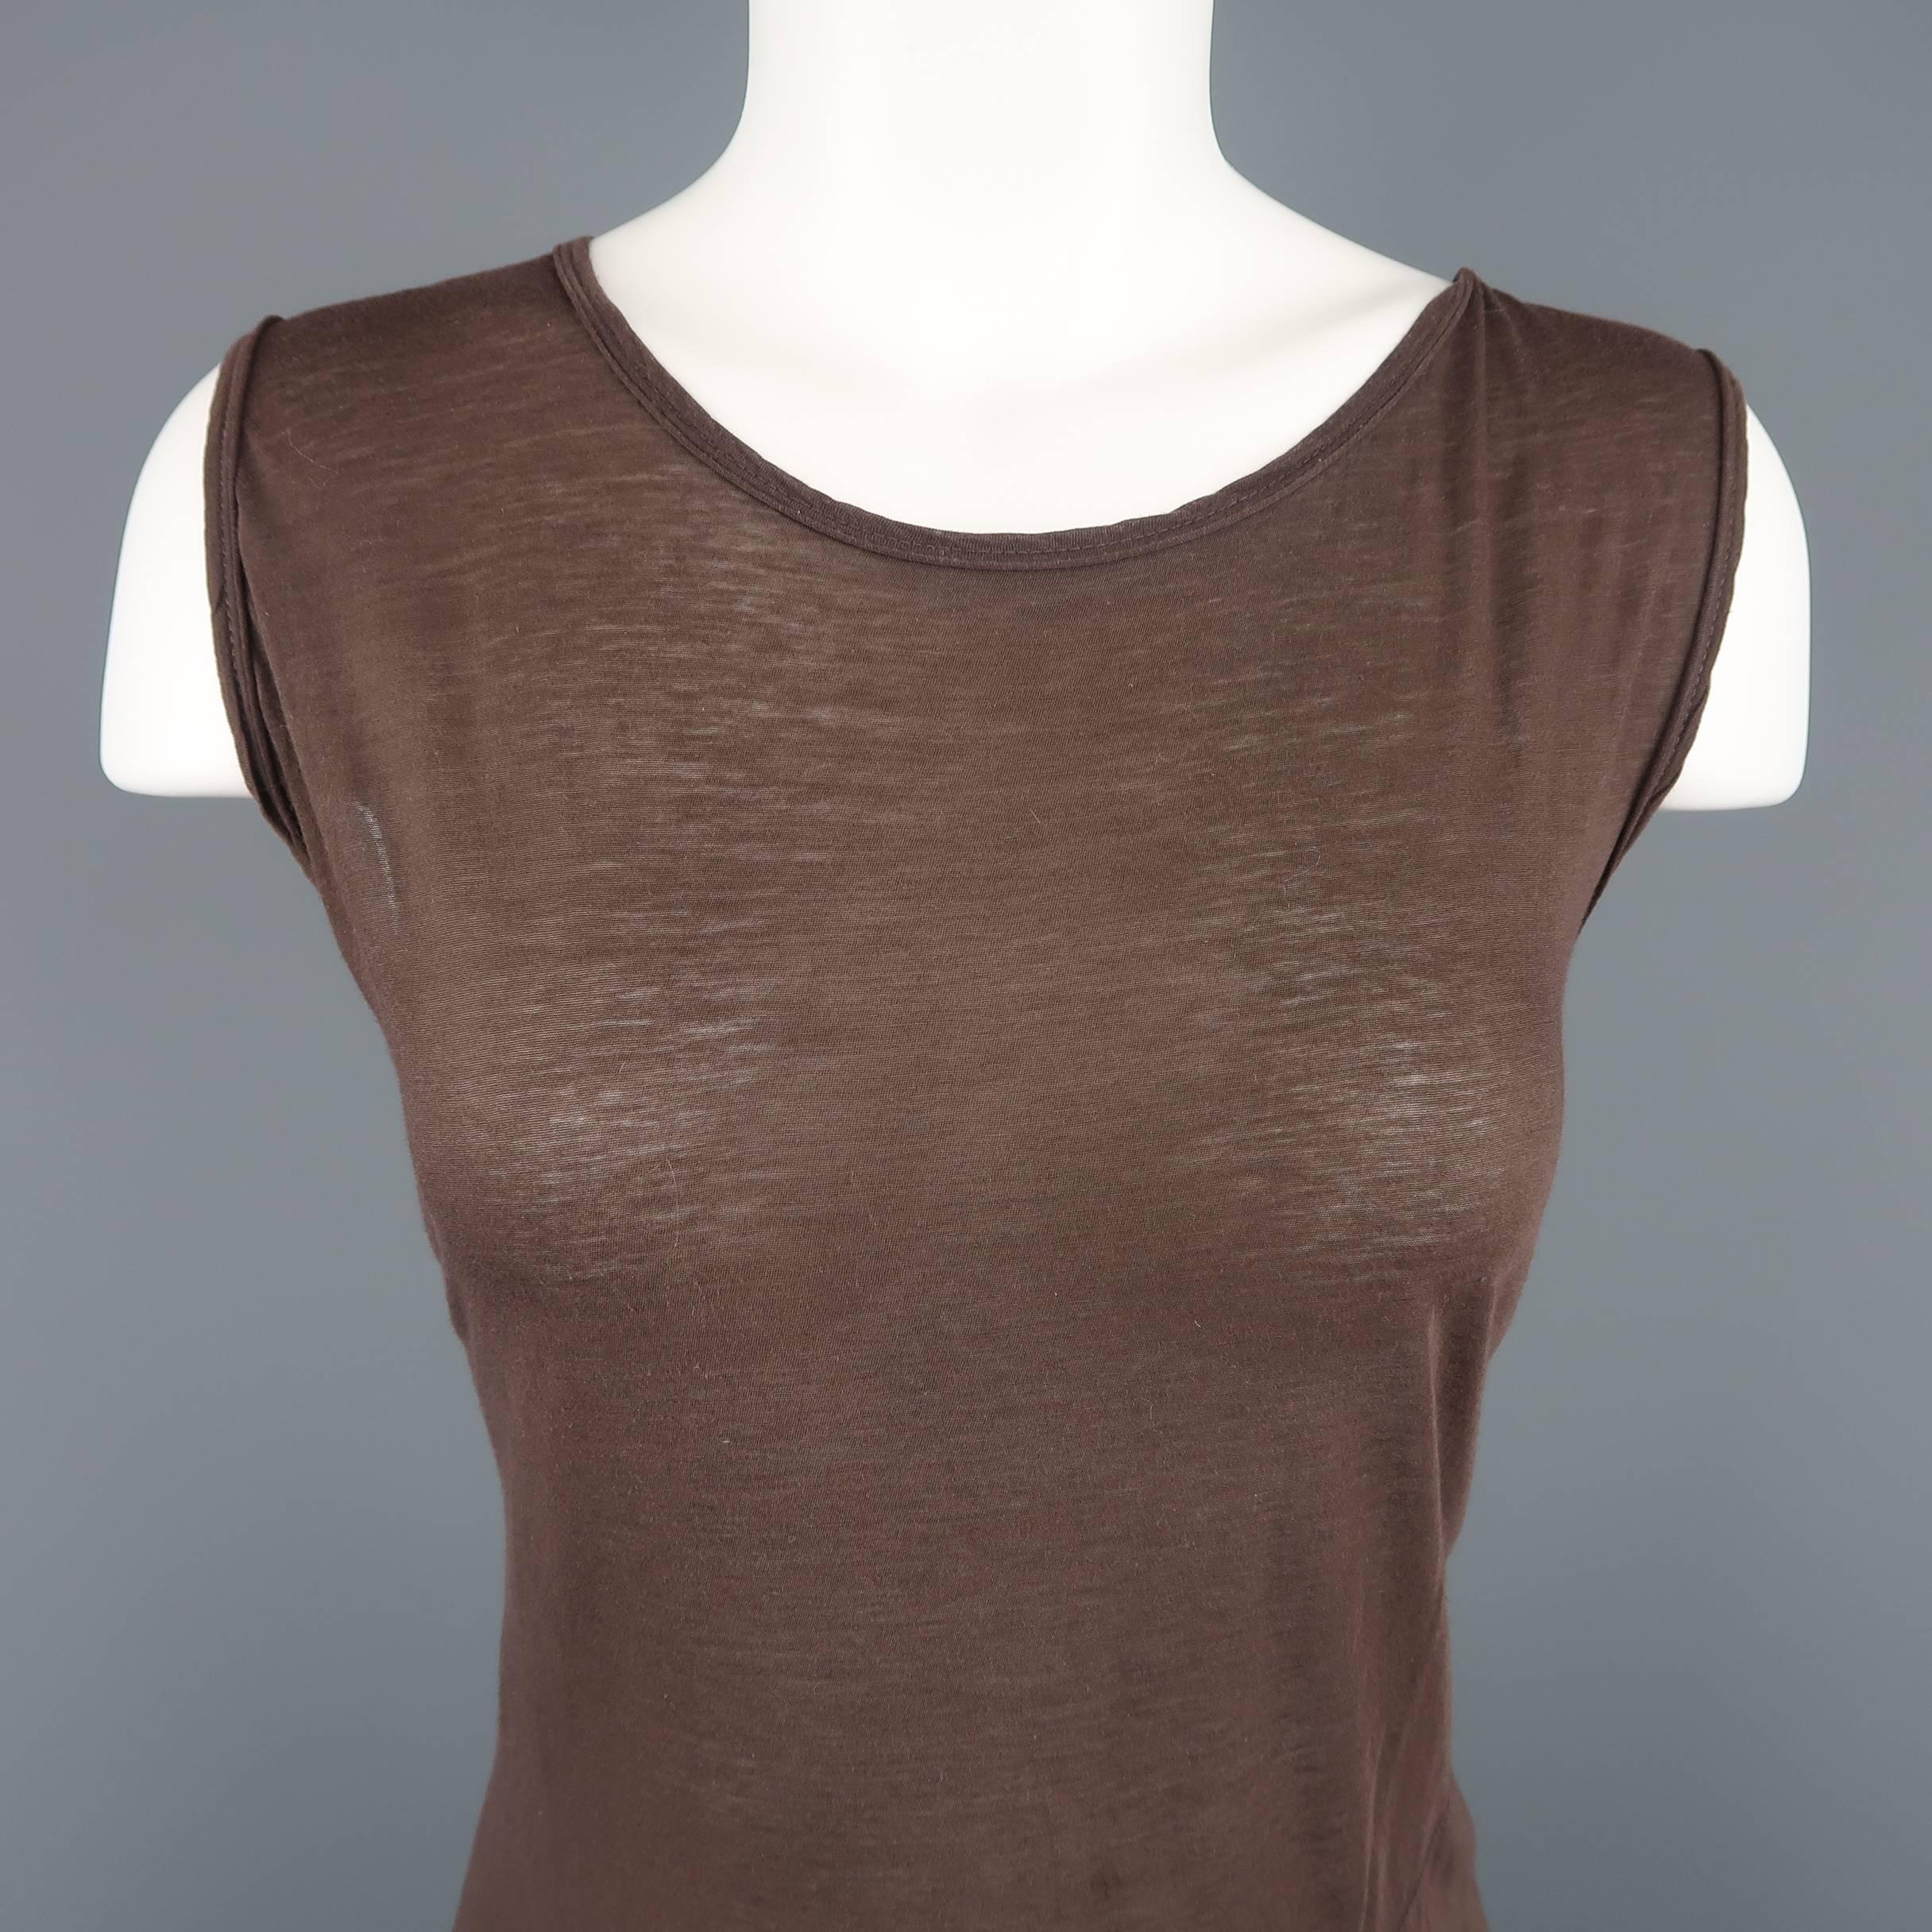 DRKSHDW by RICK OWENS tanks comes in taupe brown silk blend burnout jersey with diagonal seams and a scoop neck. Made in Italy.
 
Good Pre-Owned Condition.
Marked: (no size)
 
Measurements:
 
Shoulder: 16 in.
Bust: 38 in.
Length: 31 in.
